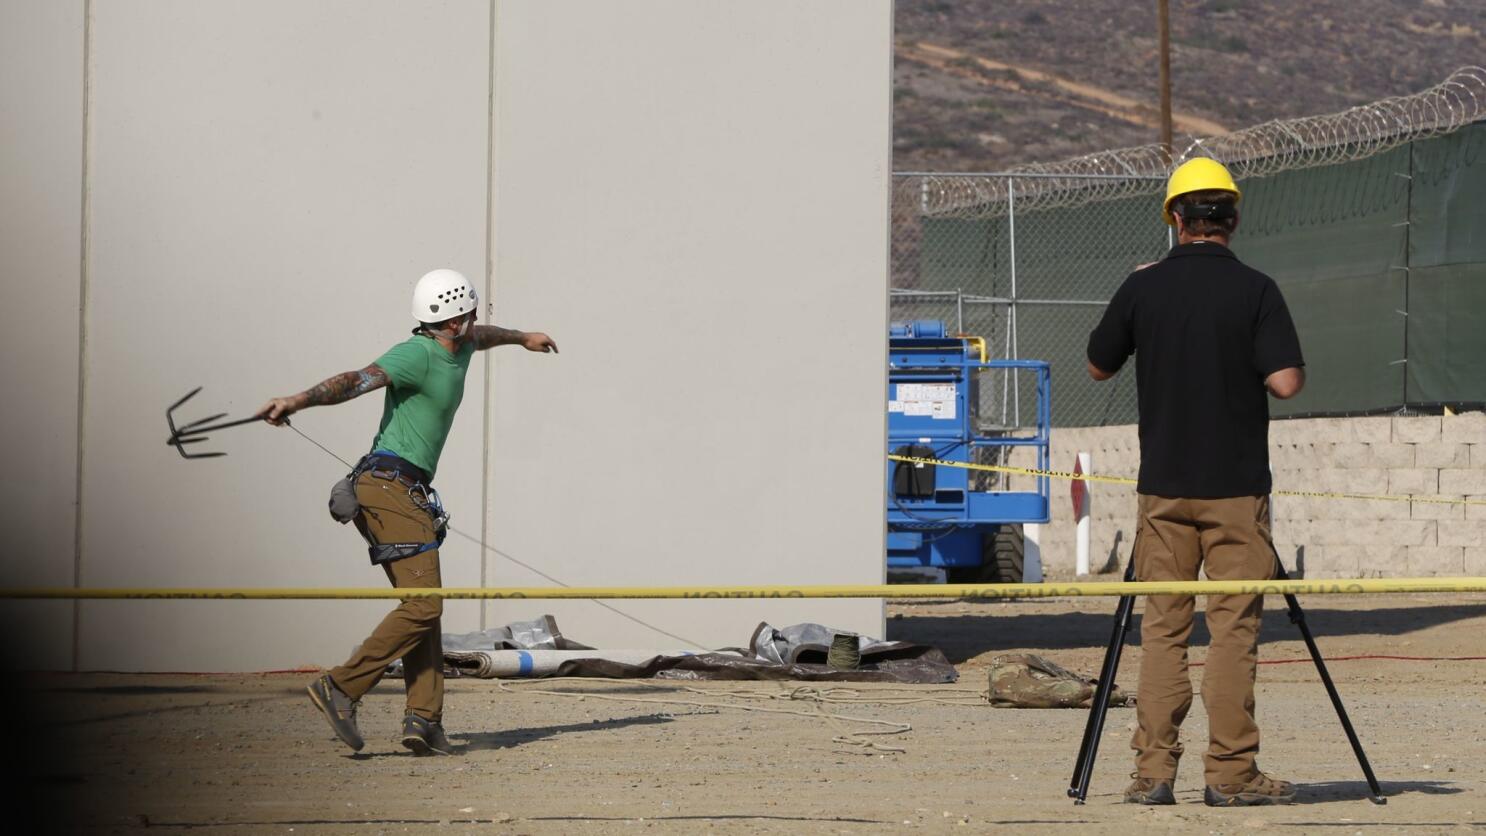 Grappling hooks and harnesses: Agents put border wall prototypes